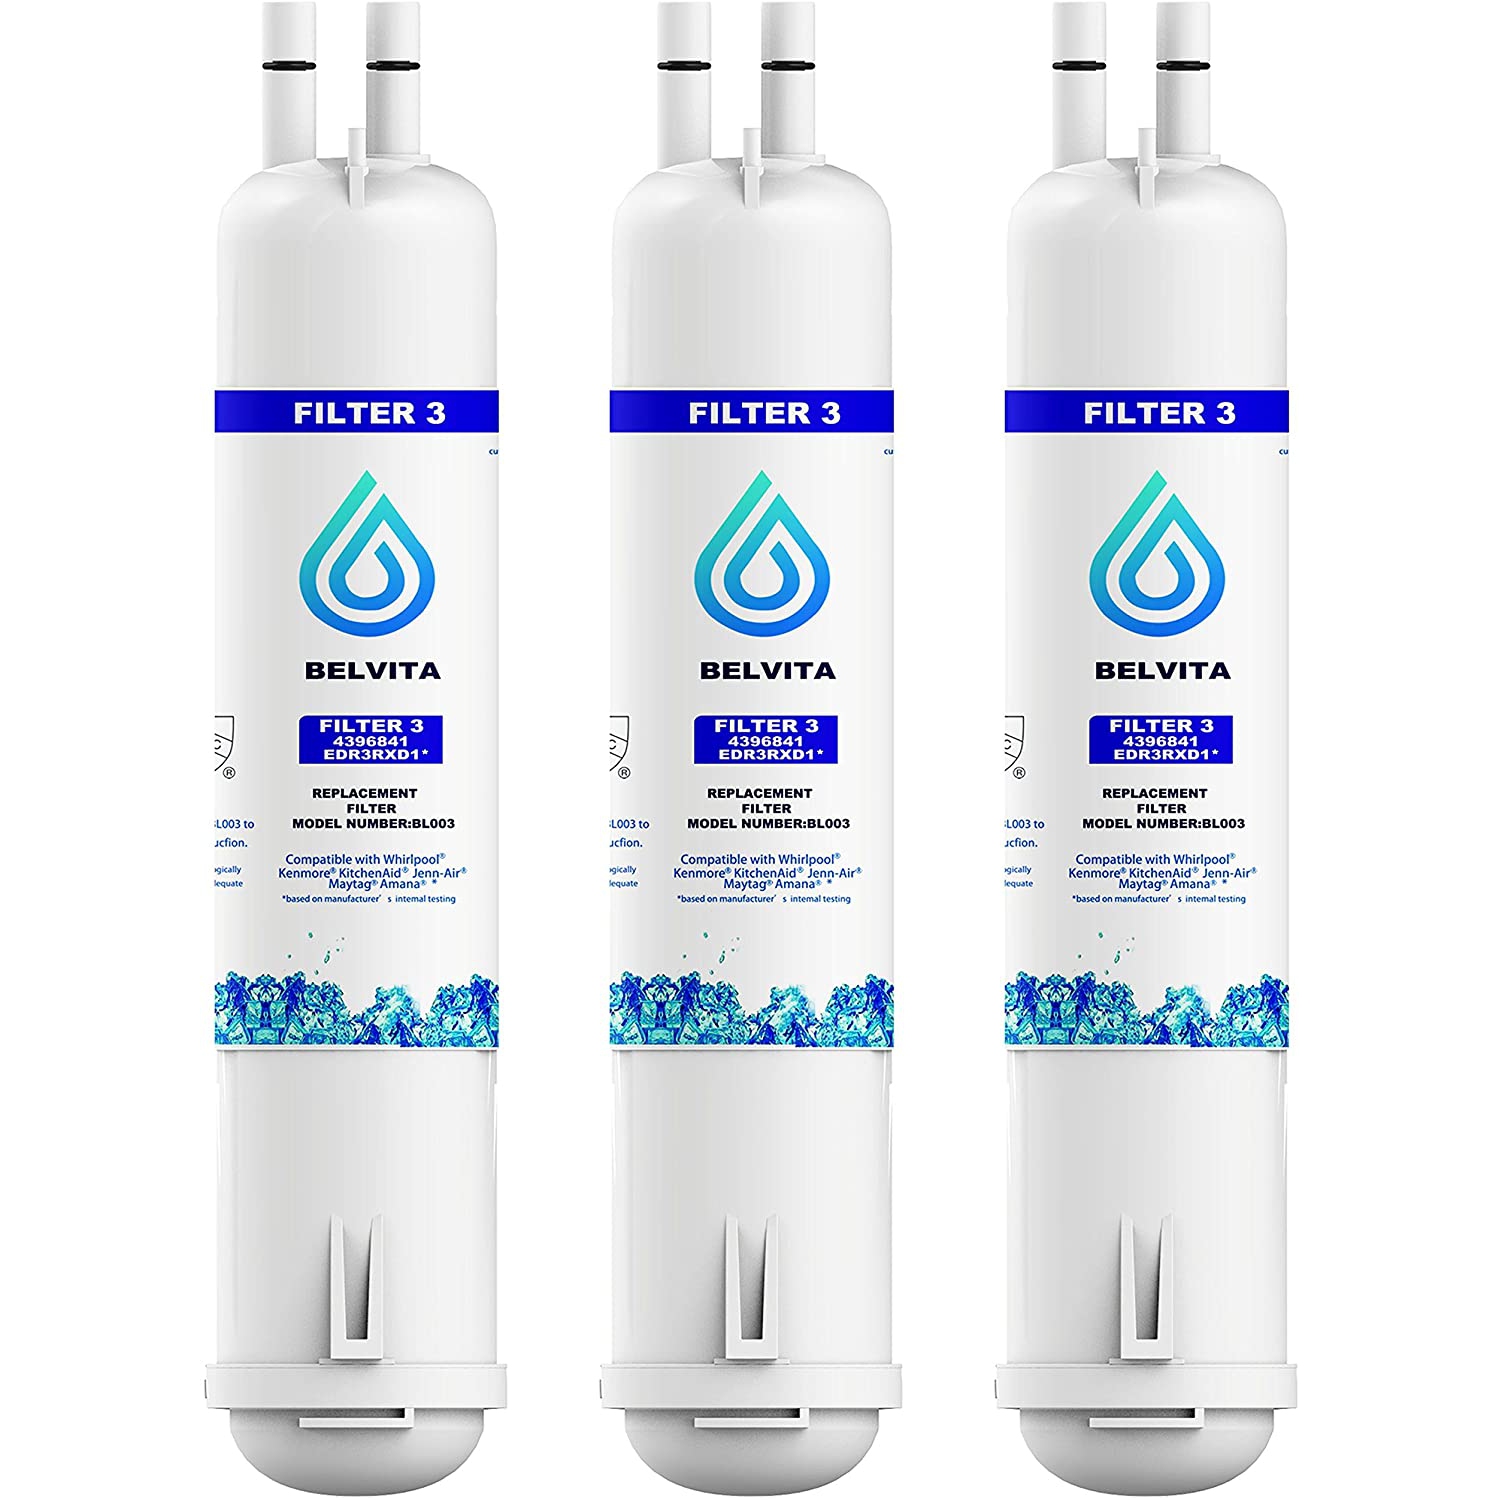 Kenmore 46-9030 W10121146（3 Pack,white） Compatible with Whirlpool EDR3RXD1 4396710 4396841 Perfect Ice Refrigerator Water Filter 4396841 Pur W10121145 Filter 3 